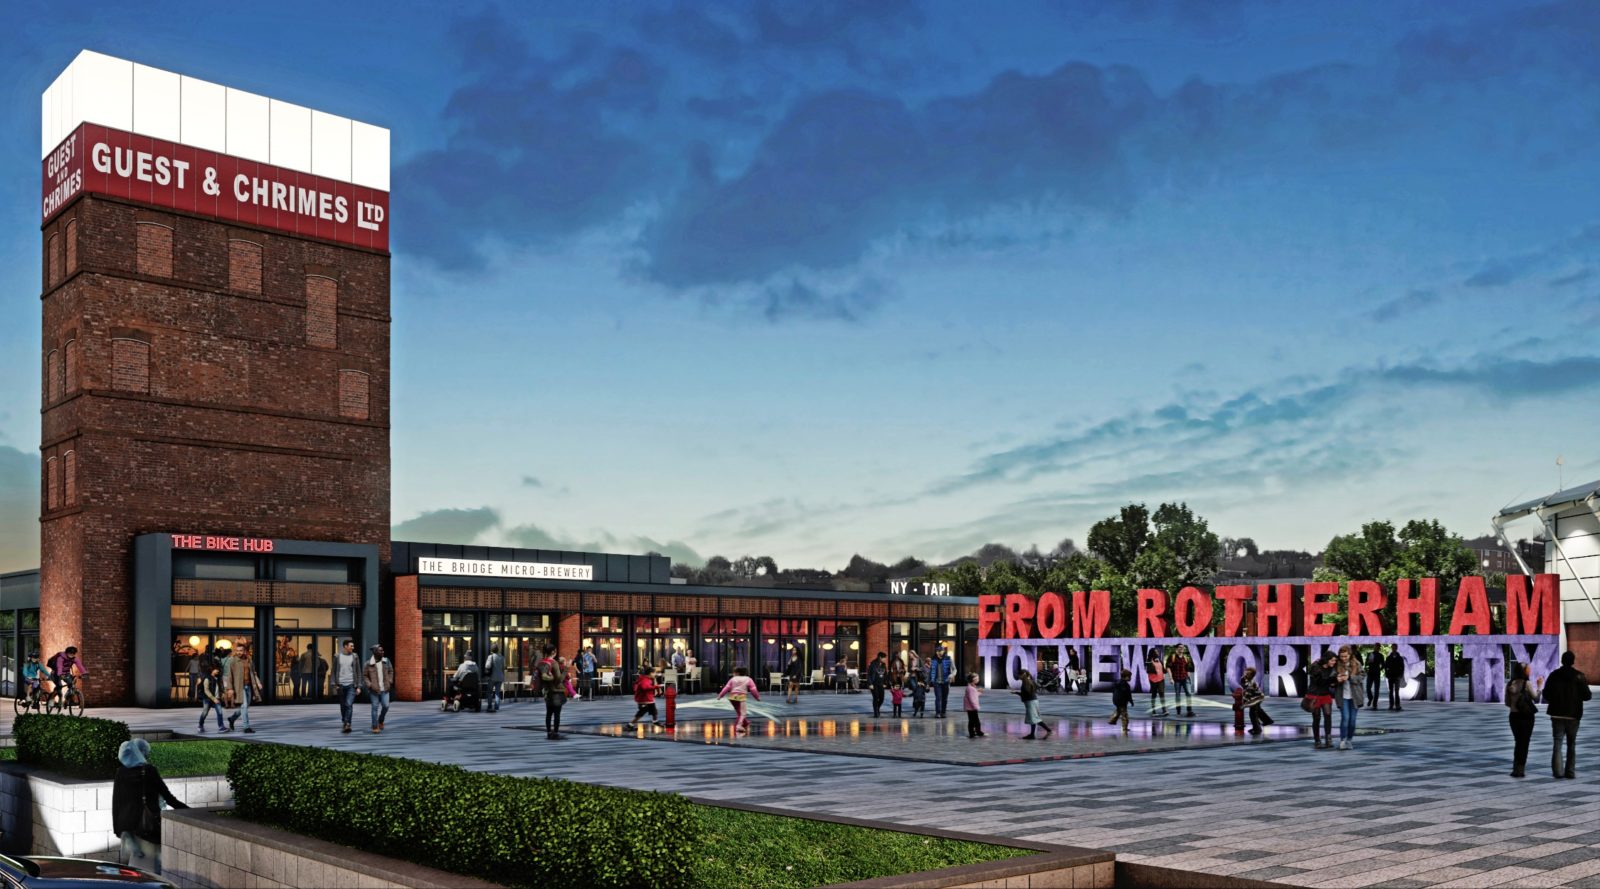 Artist’s impression of regeneration of the Guest & Chrimes heritage site